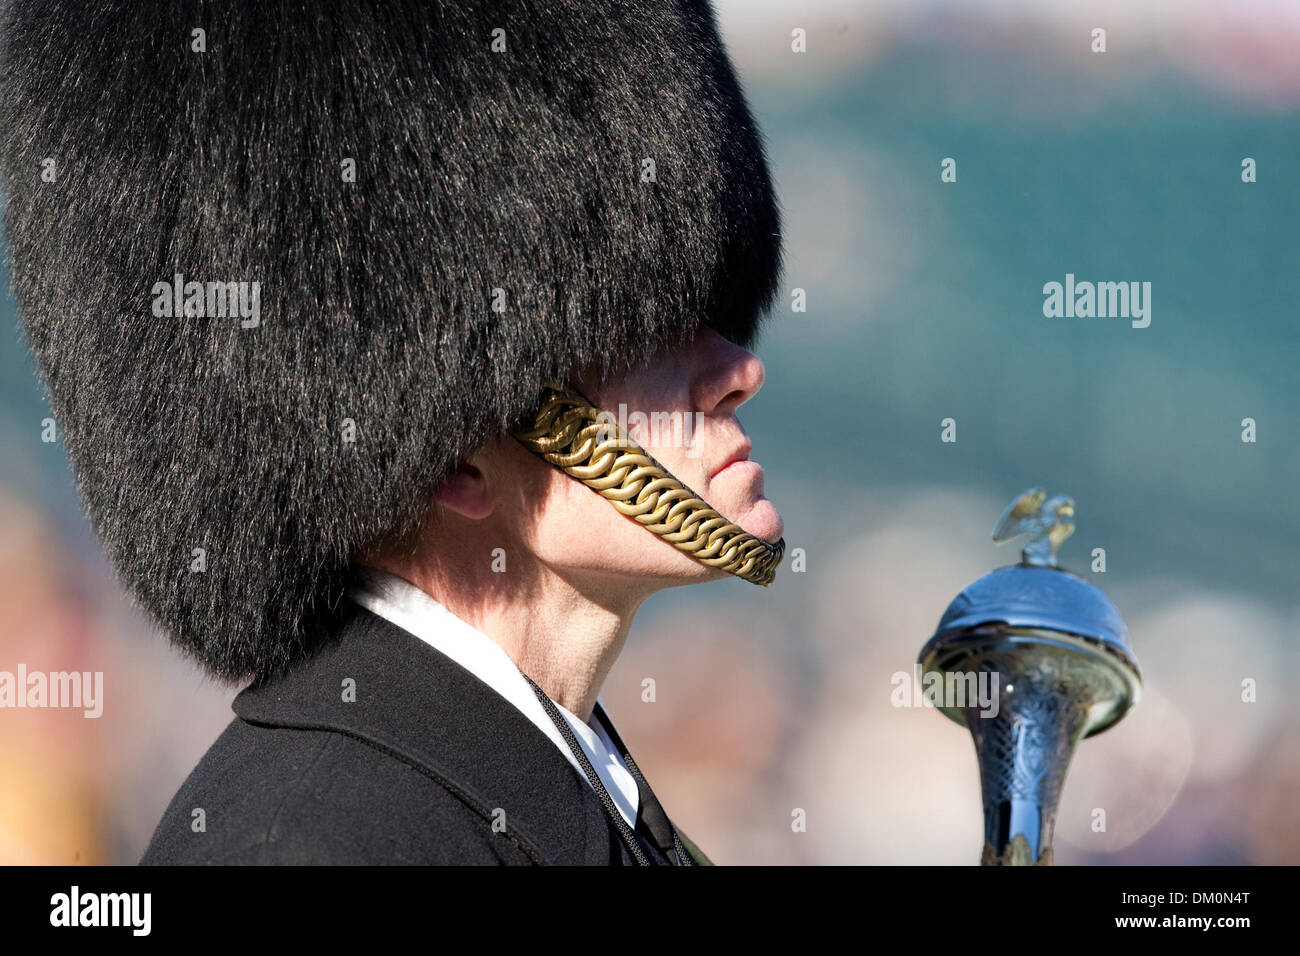 Dec. 12, 2009 - Philadelphia, Pennsylvania, U.S - 12 December 2009:  Marching band during football action in the game between the Army Black Knights and the Navy Midshipmen played at Lincoln Financial Field in Philadelphia, Pennsylvania.  Navy defeated Army 17-3 for their eighth straight win in the series. (Credit Image: © Alex Cena/Southcreek Global/ZUMApress.com) Stock Photo